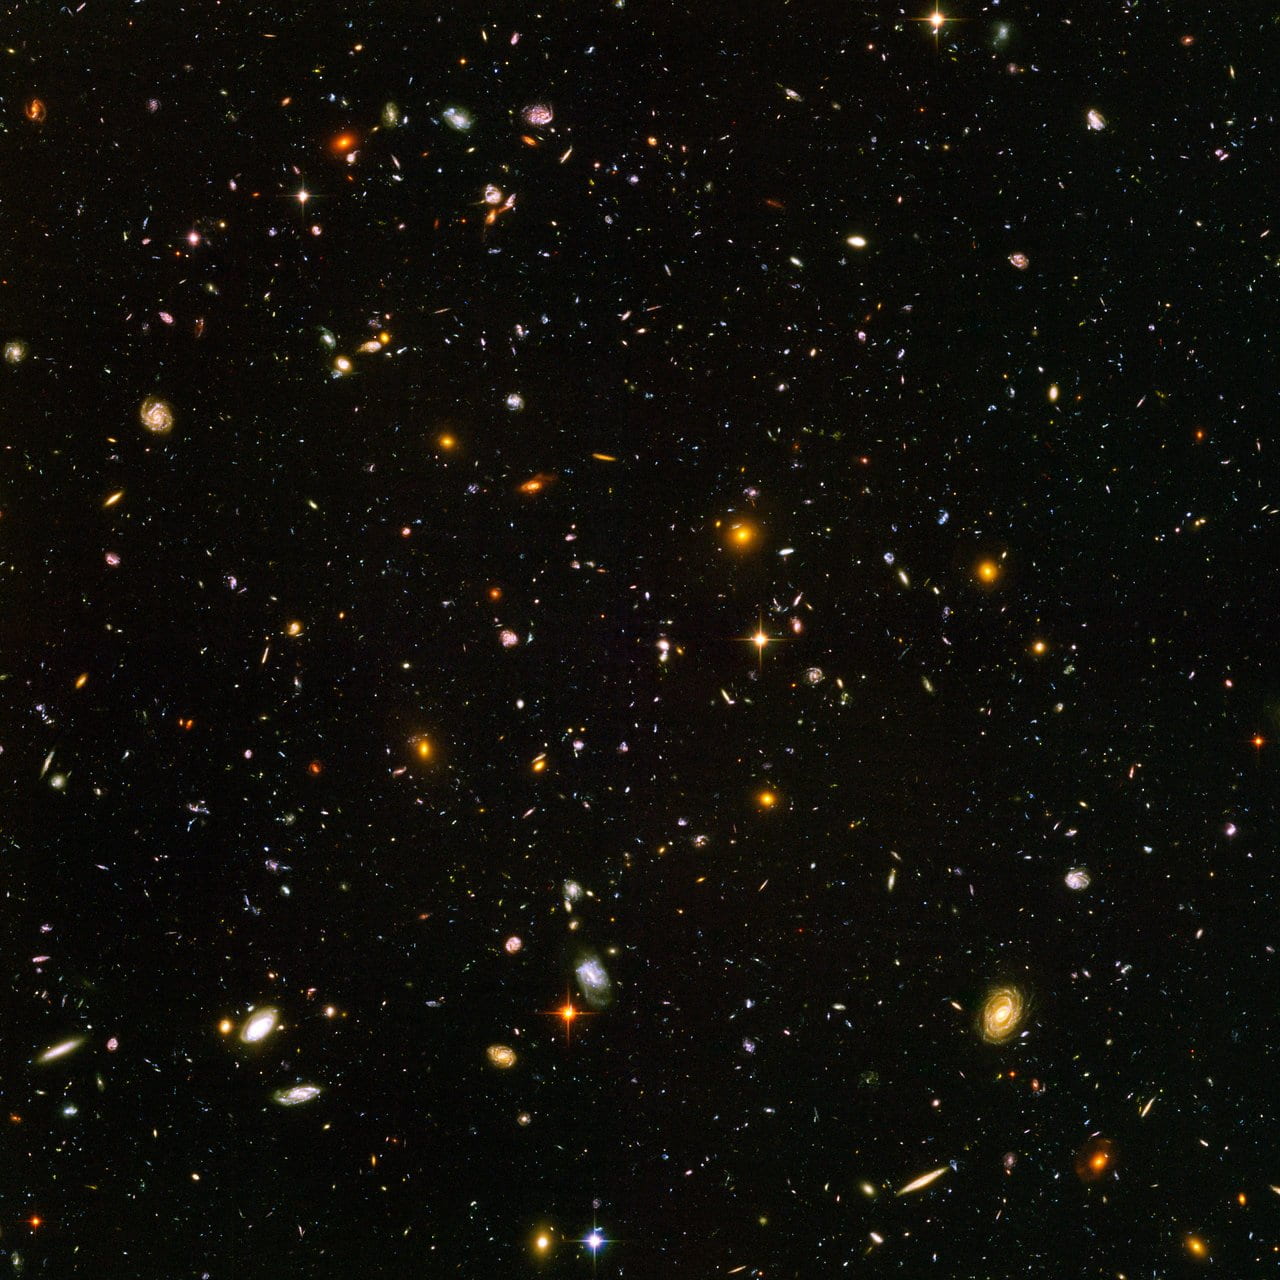 Hubble ultra deep field, in which well-defined spiral and elliptical galaxies formed about 1 billion years ago.